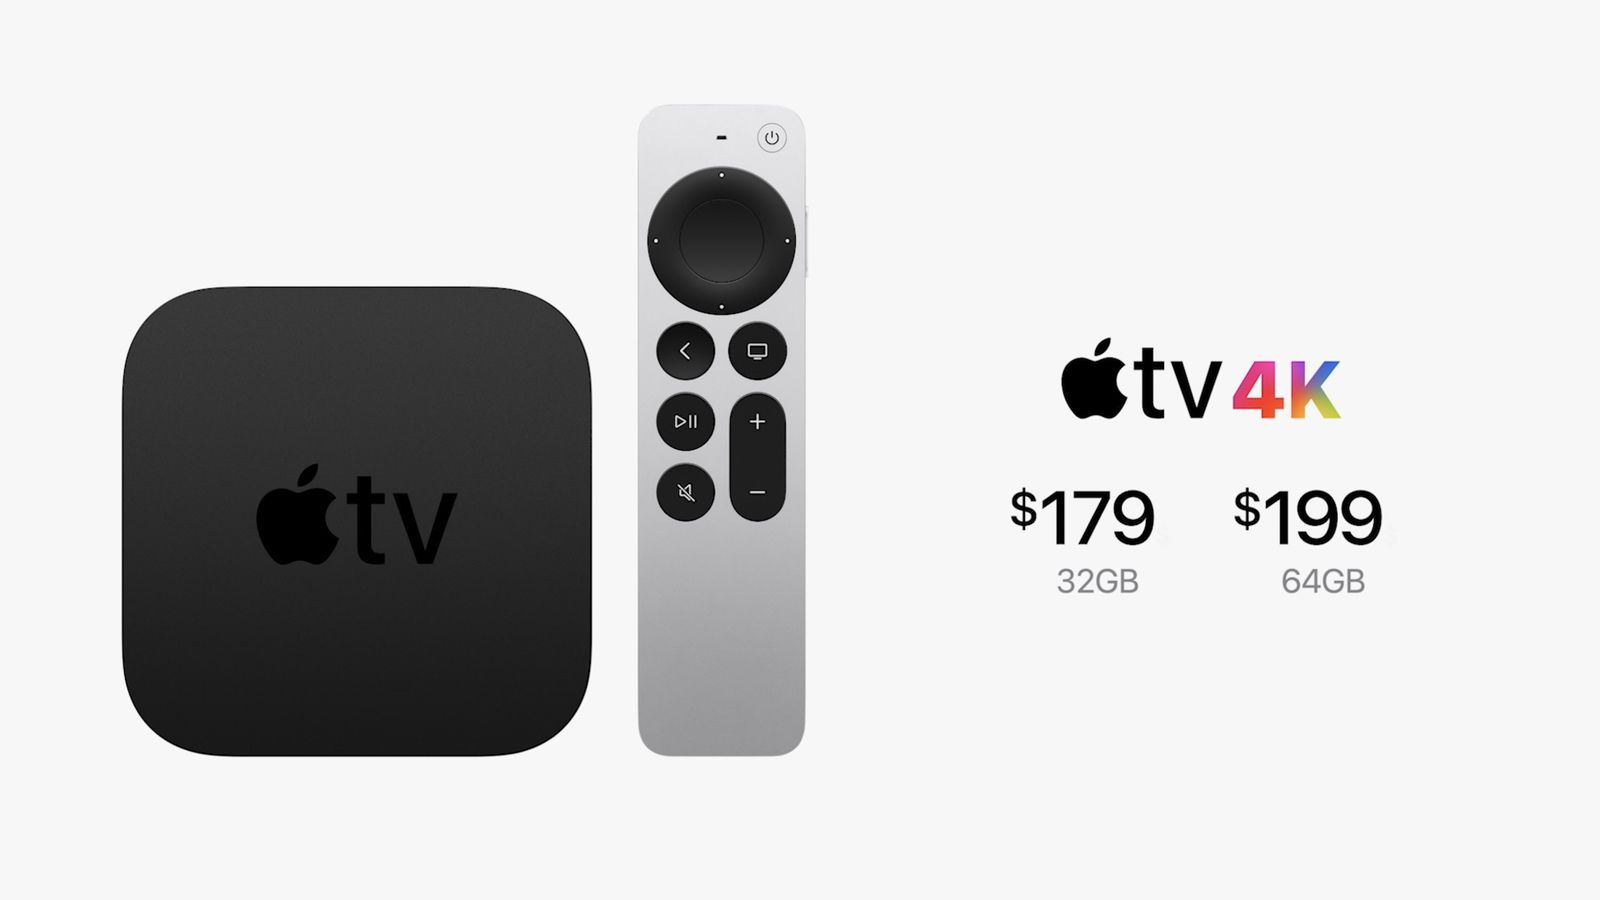 Apple Announces Apple TV 4K with A12 Chip and Upgraded Siri Remote - MacRumors